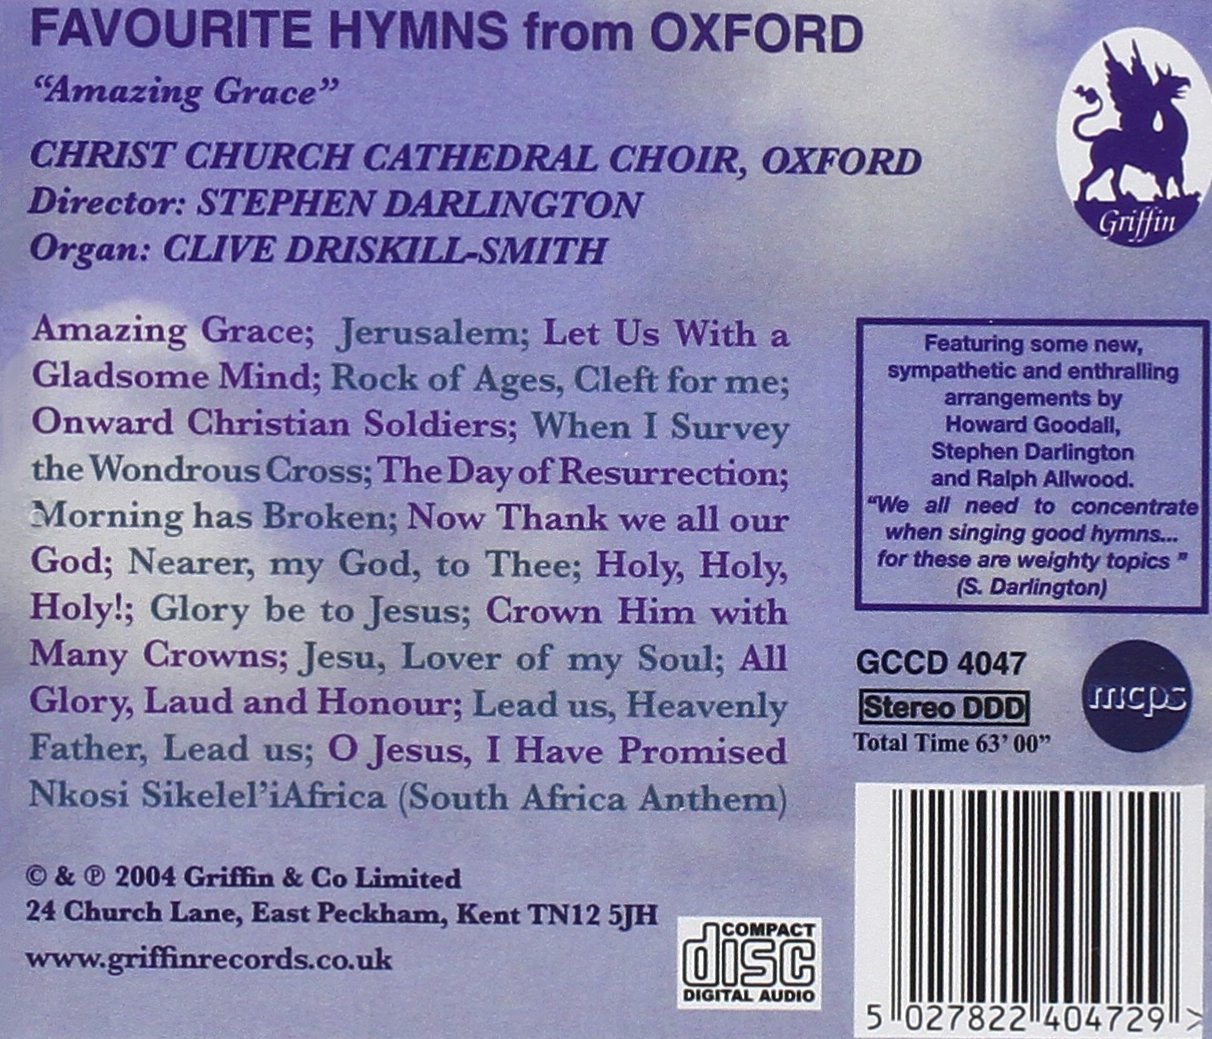 FAVOURITE HYMNS FROM OXFORD "AMAZING GRACE" - CHRIST CHURCH CATHEDRAL CHOIR, DARLINGTON